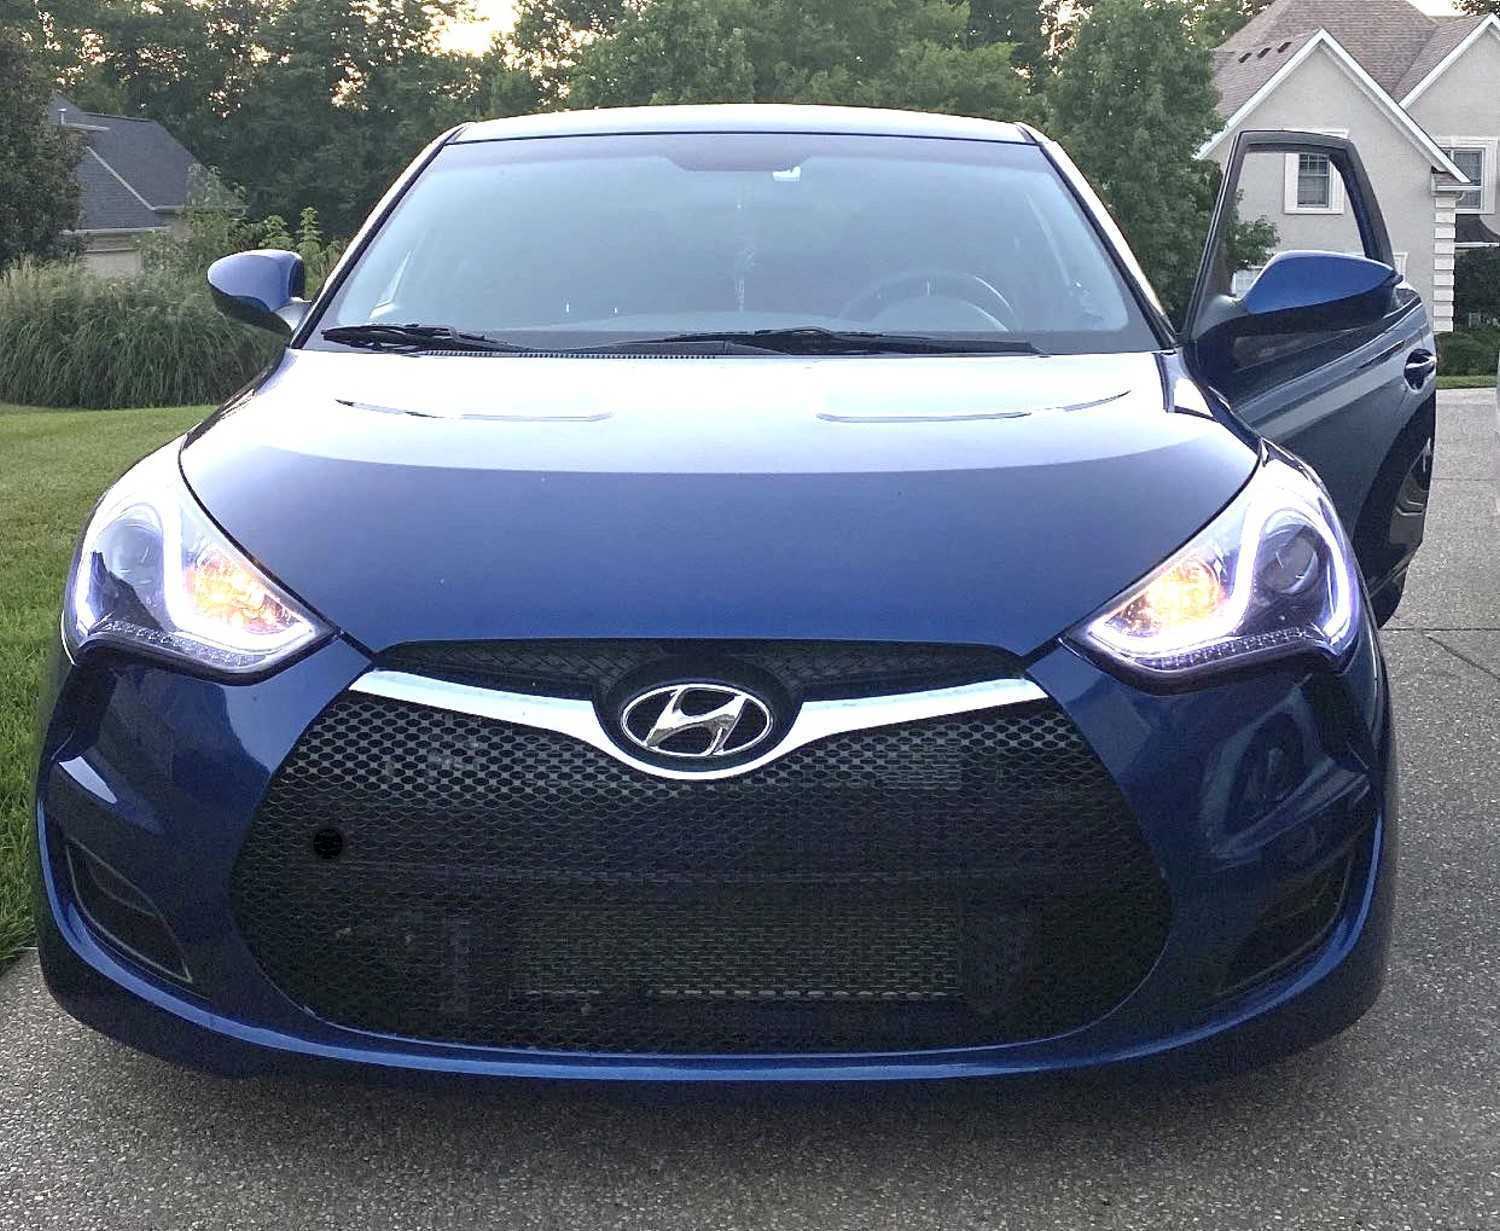 The Wait is Over!  Non-Turbo Hyundai Veloster Mesh Grille Pieces Now Available - Shipping in November